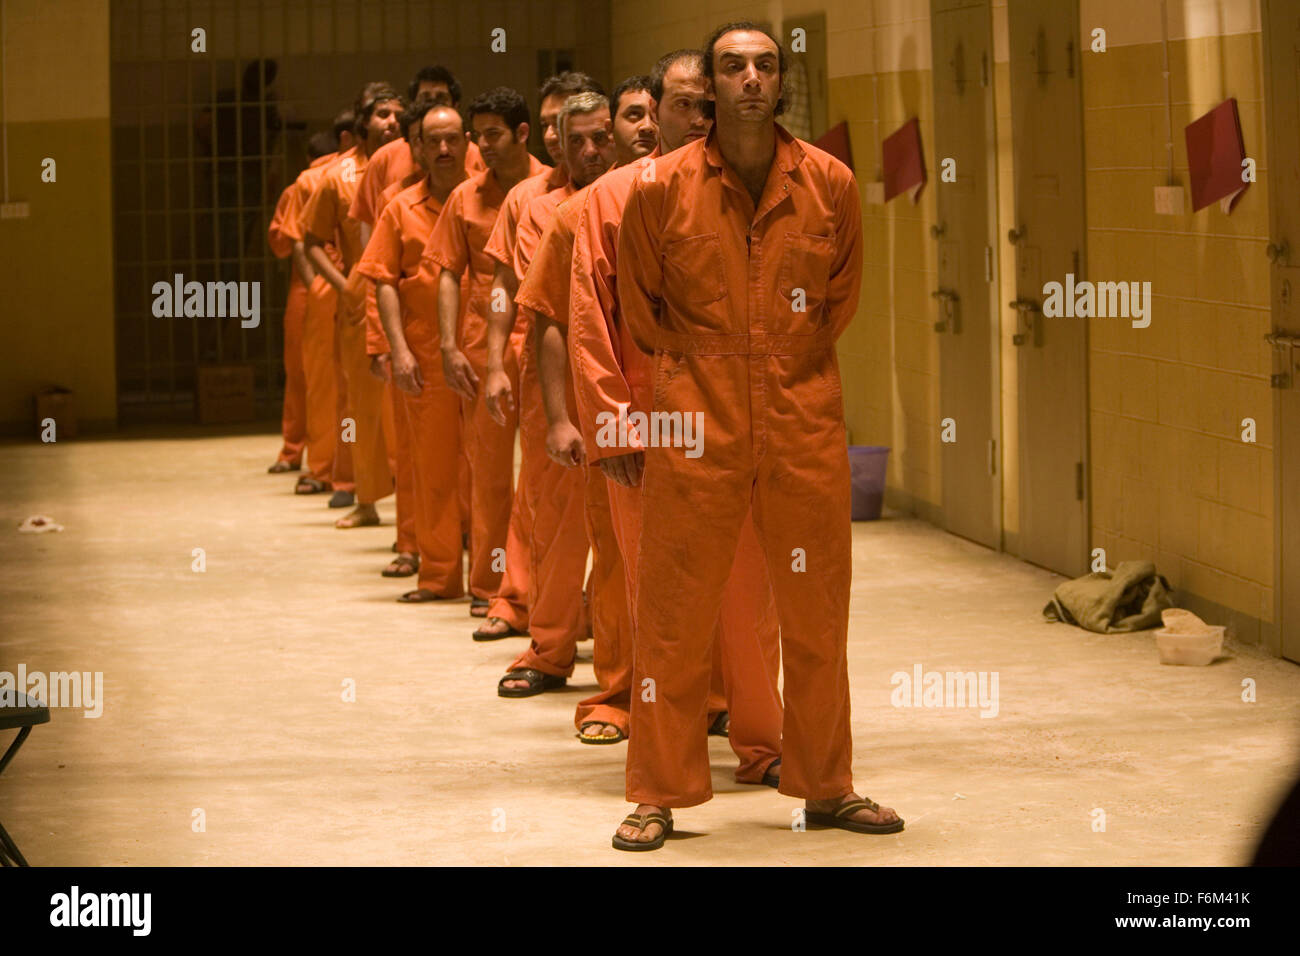 RELEASE DATE: Feb 12, 2008. MOVIE TITLE: Standard Operating Procedure. STUDIO: Sony Pictures Classics. PLOT: Errol Morris examines the incidents of abuse and torture of suspected terrorists at the hands of U.S. forces at the Abu Ghraib prison. PICTURED: Scene of the Documentary. Stock Photo